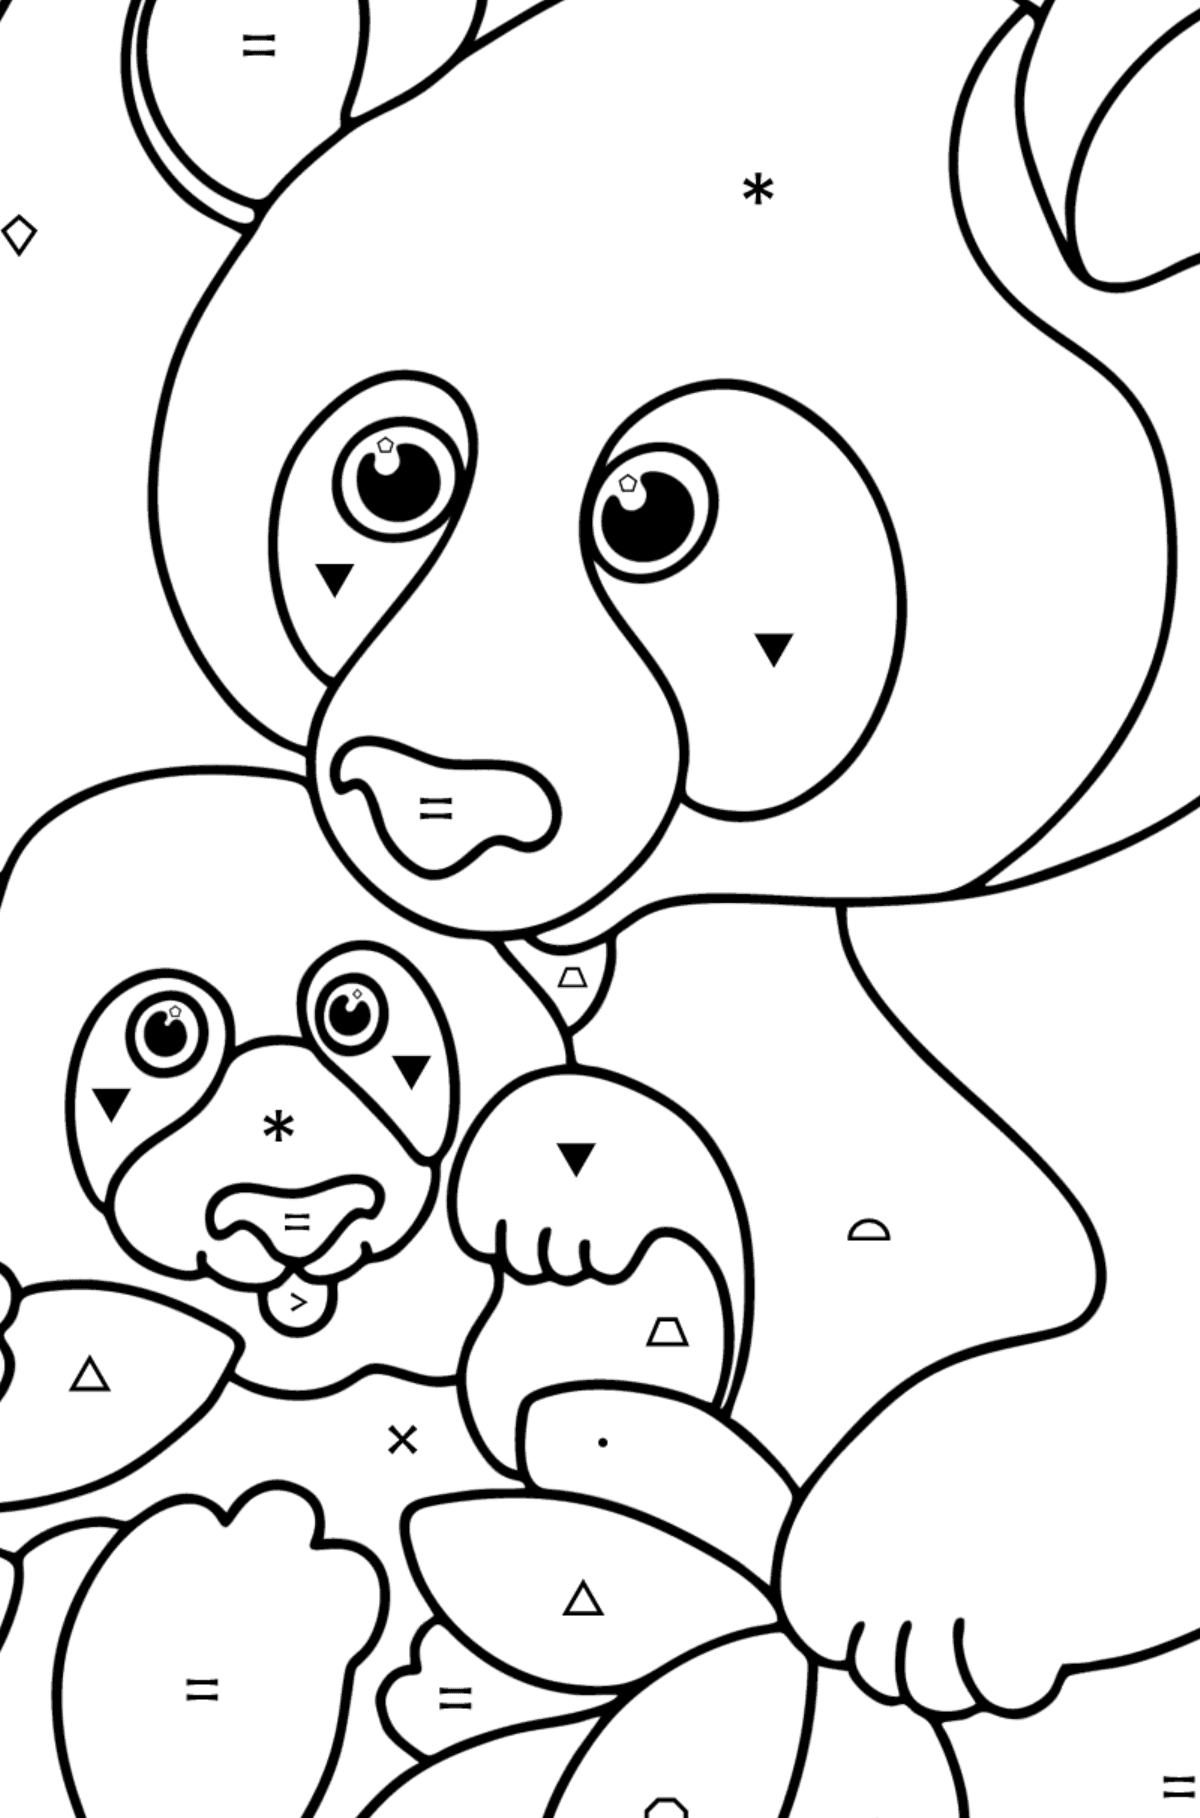 Giant panda with a cub coloring page - Coloring by Symbols and Geometric Shapes for Kids